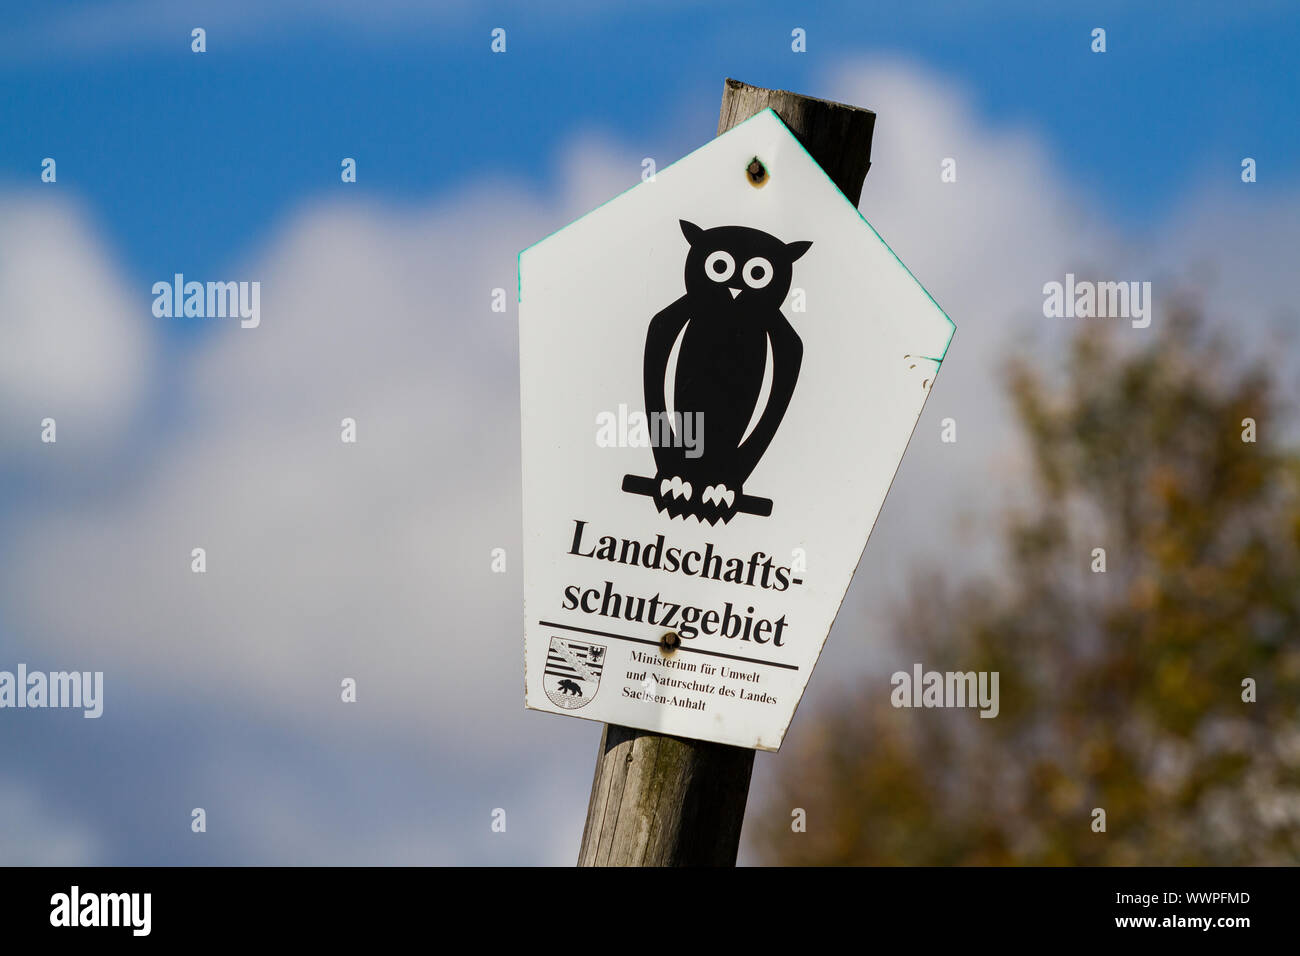 Marking of landscape conservation area in Saxony Anhalt Shield on wooden pile Stock Photo